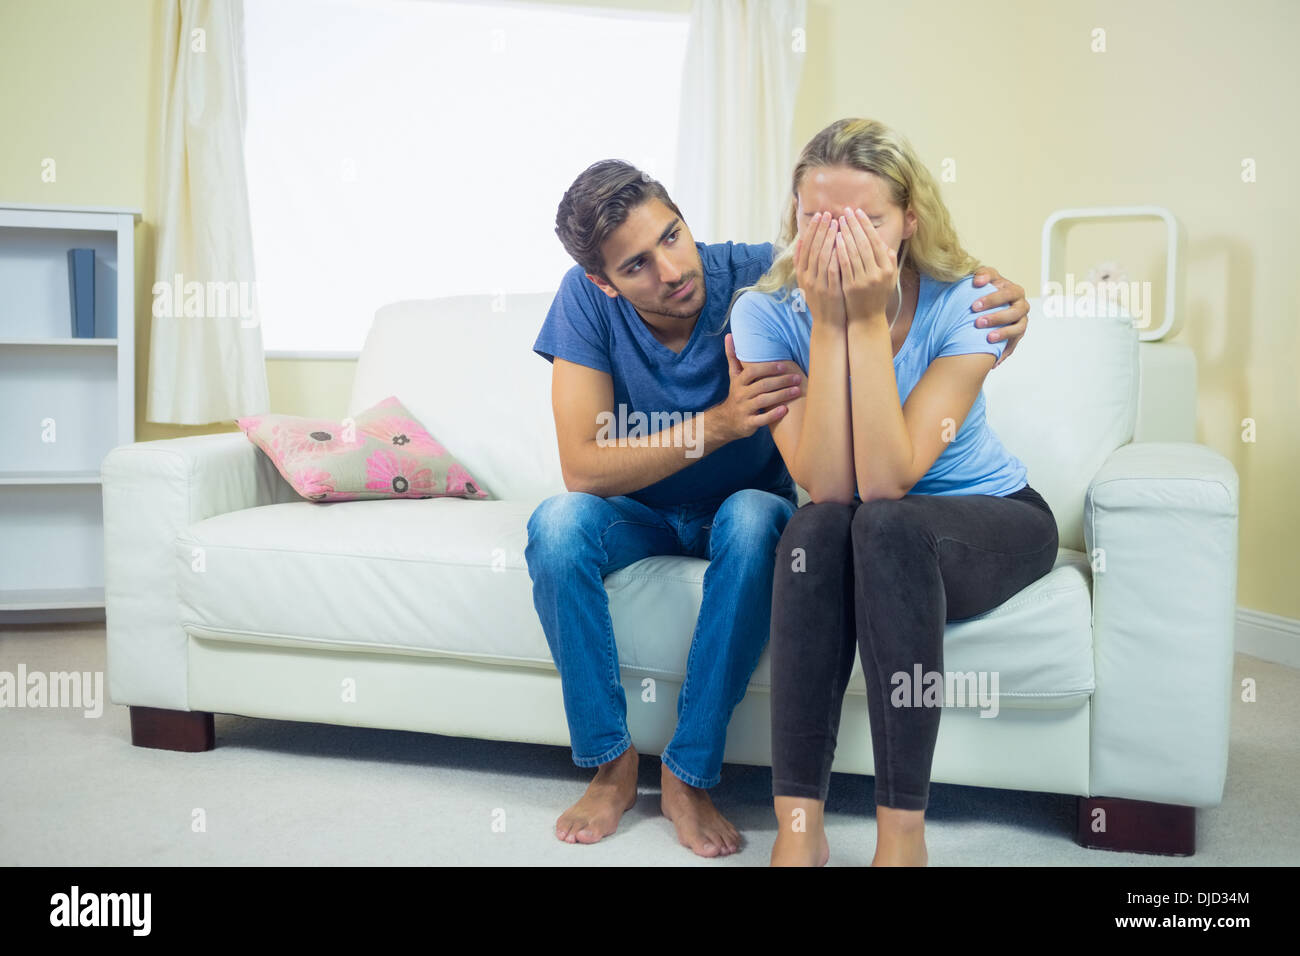 Unhappy crying woman sitting on couch Stock Photo